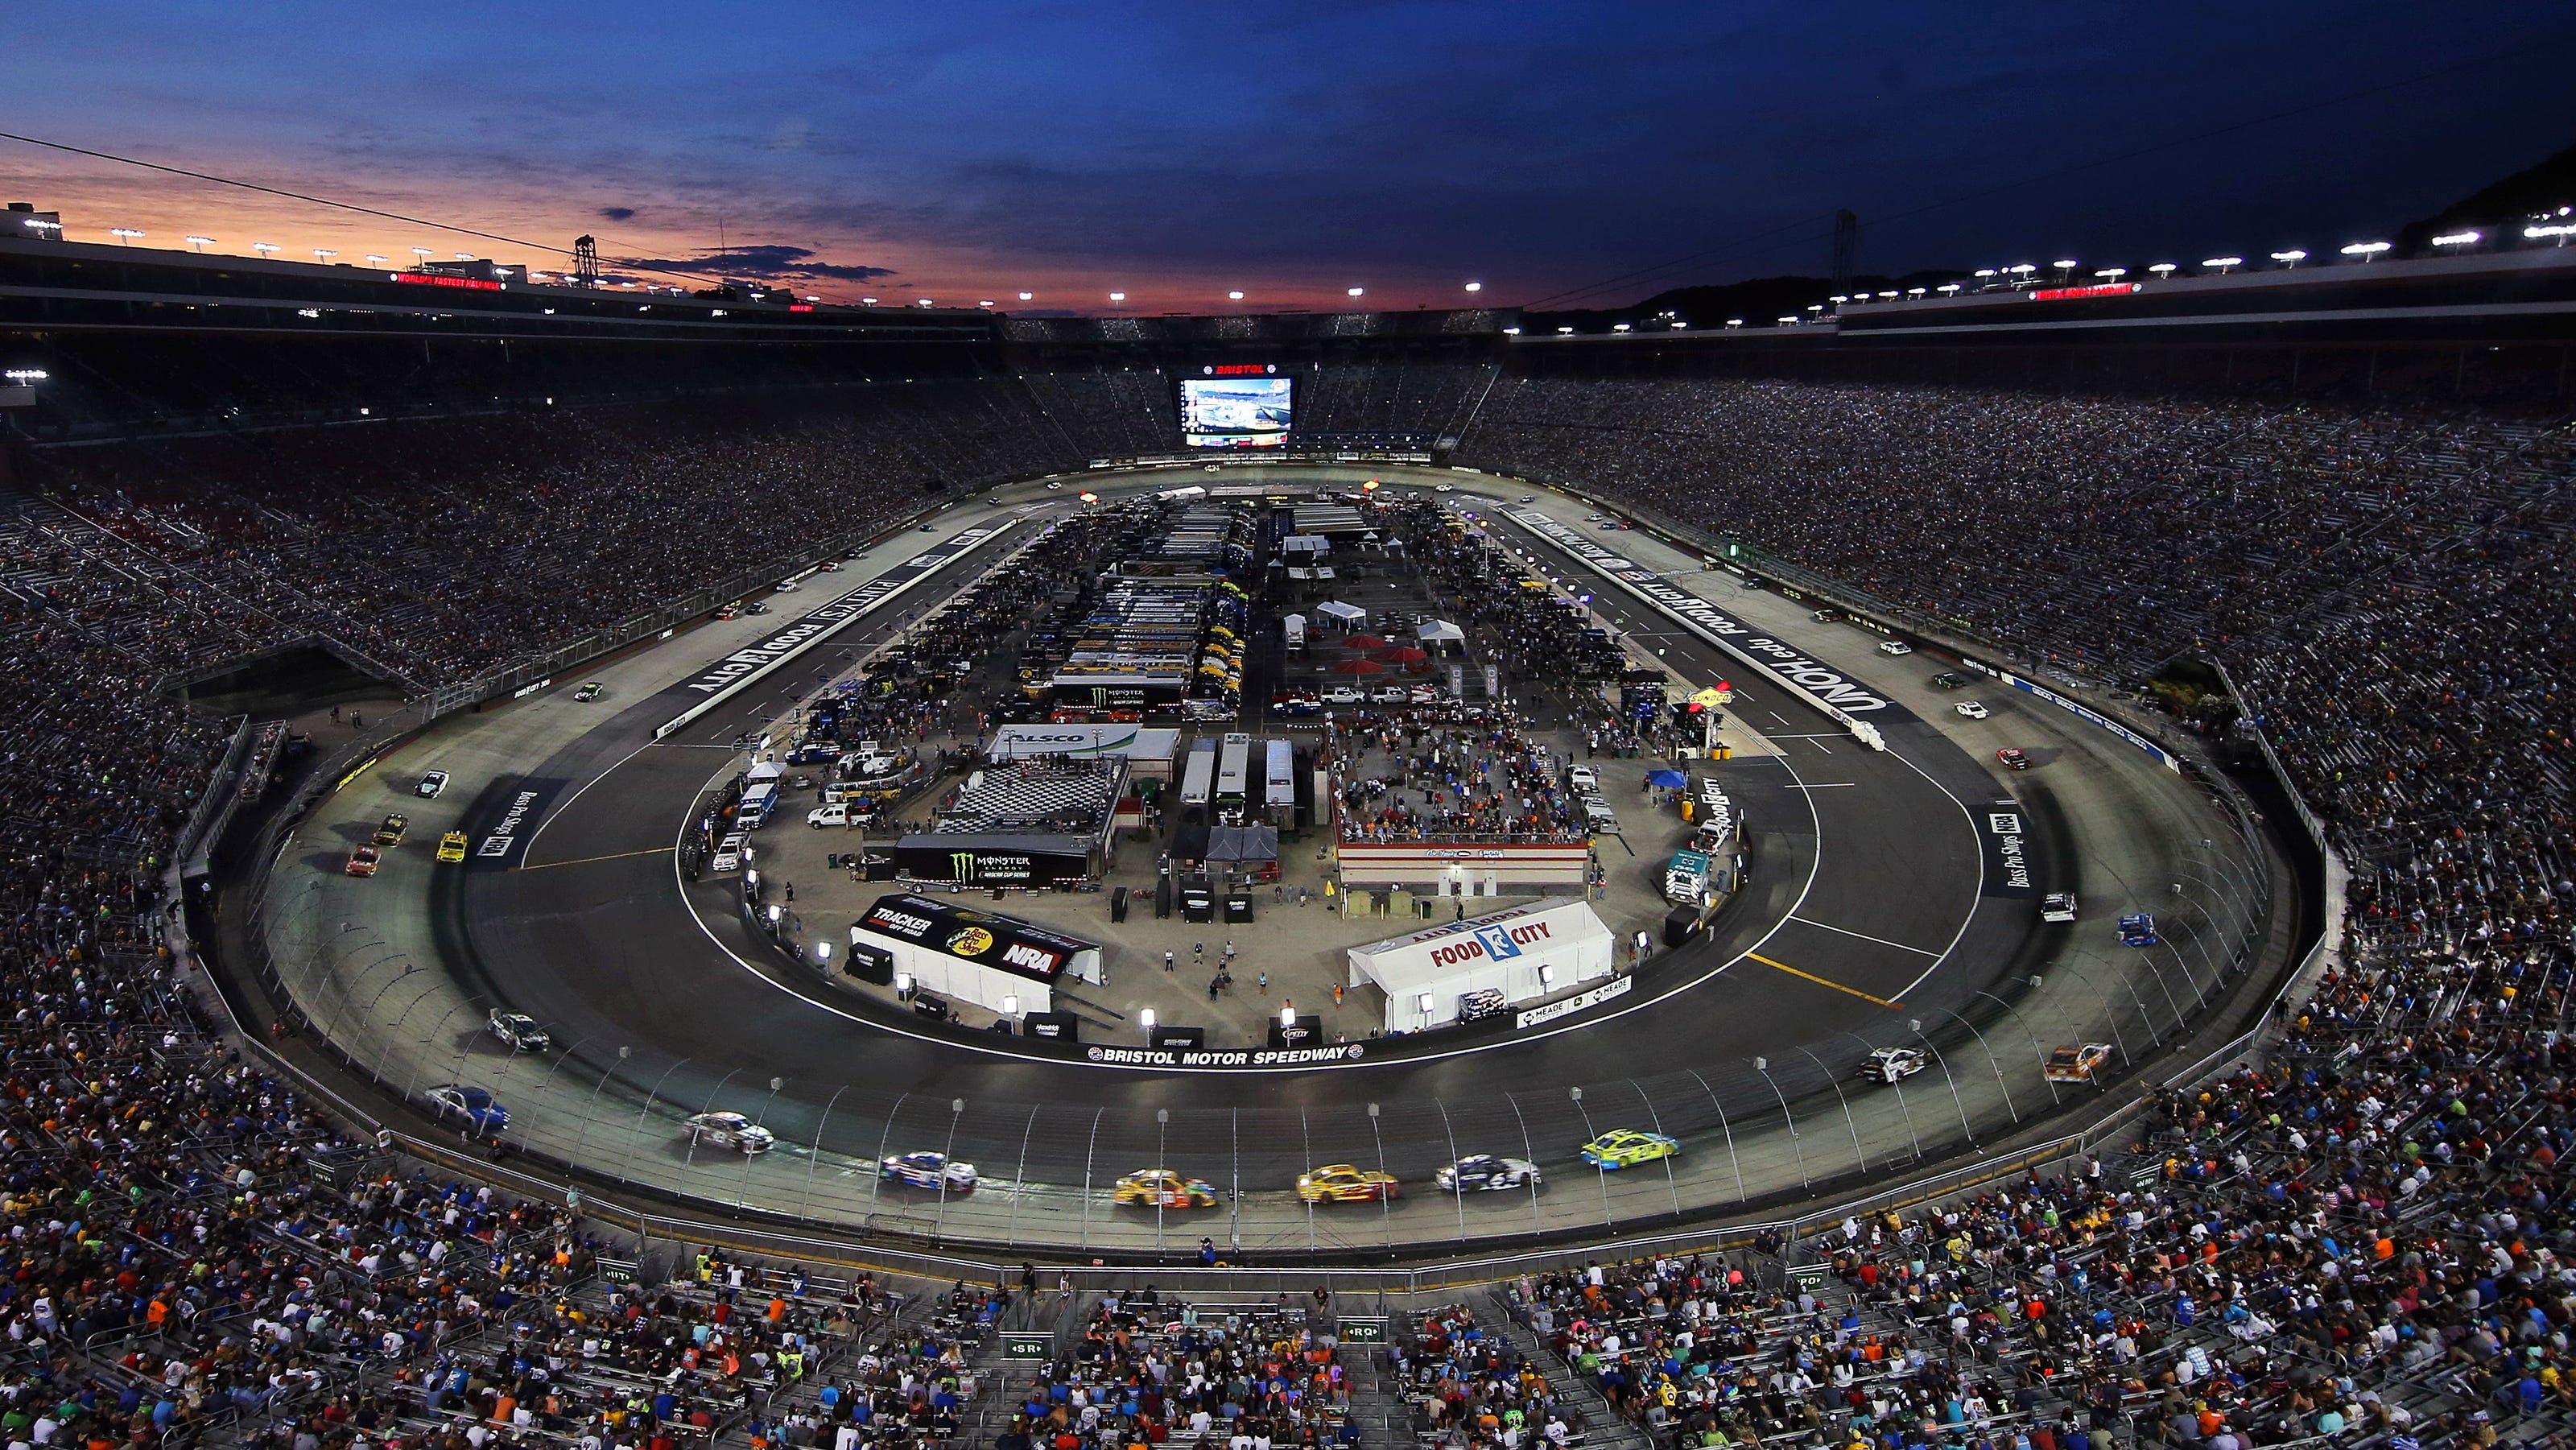 NASCAR at Bristol: Start time, lineup, TV schedule for playoff race